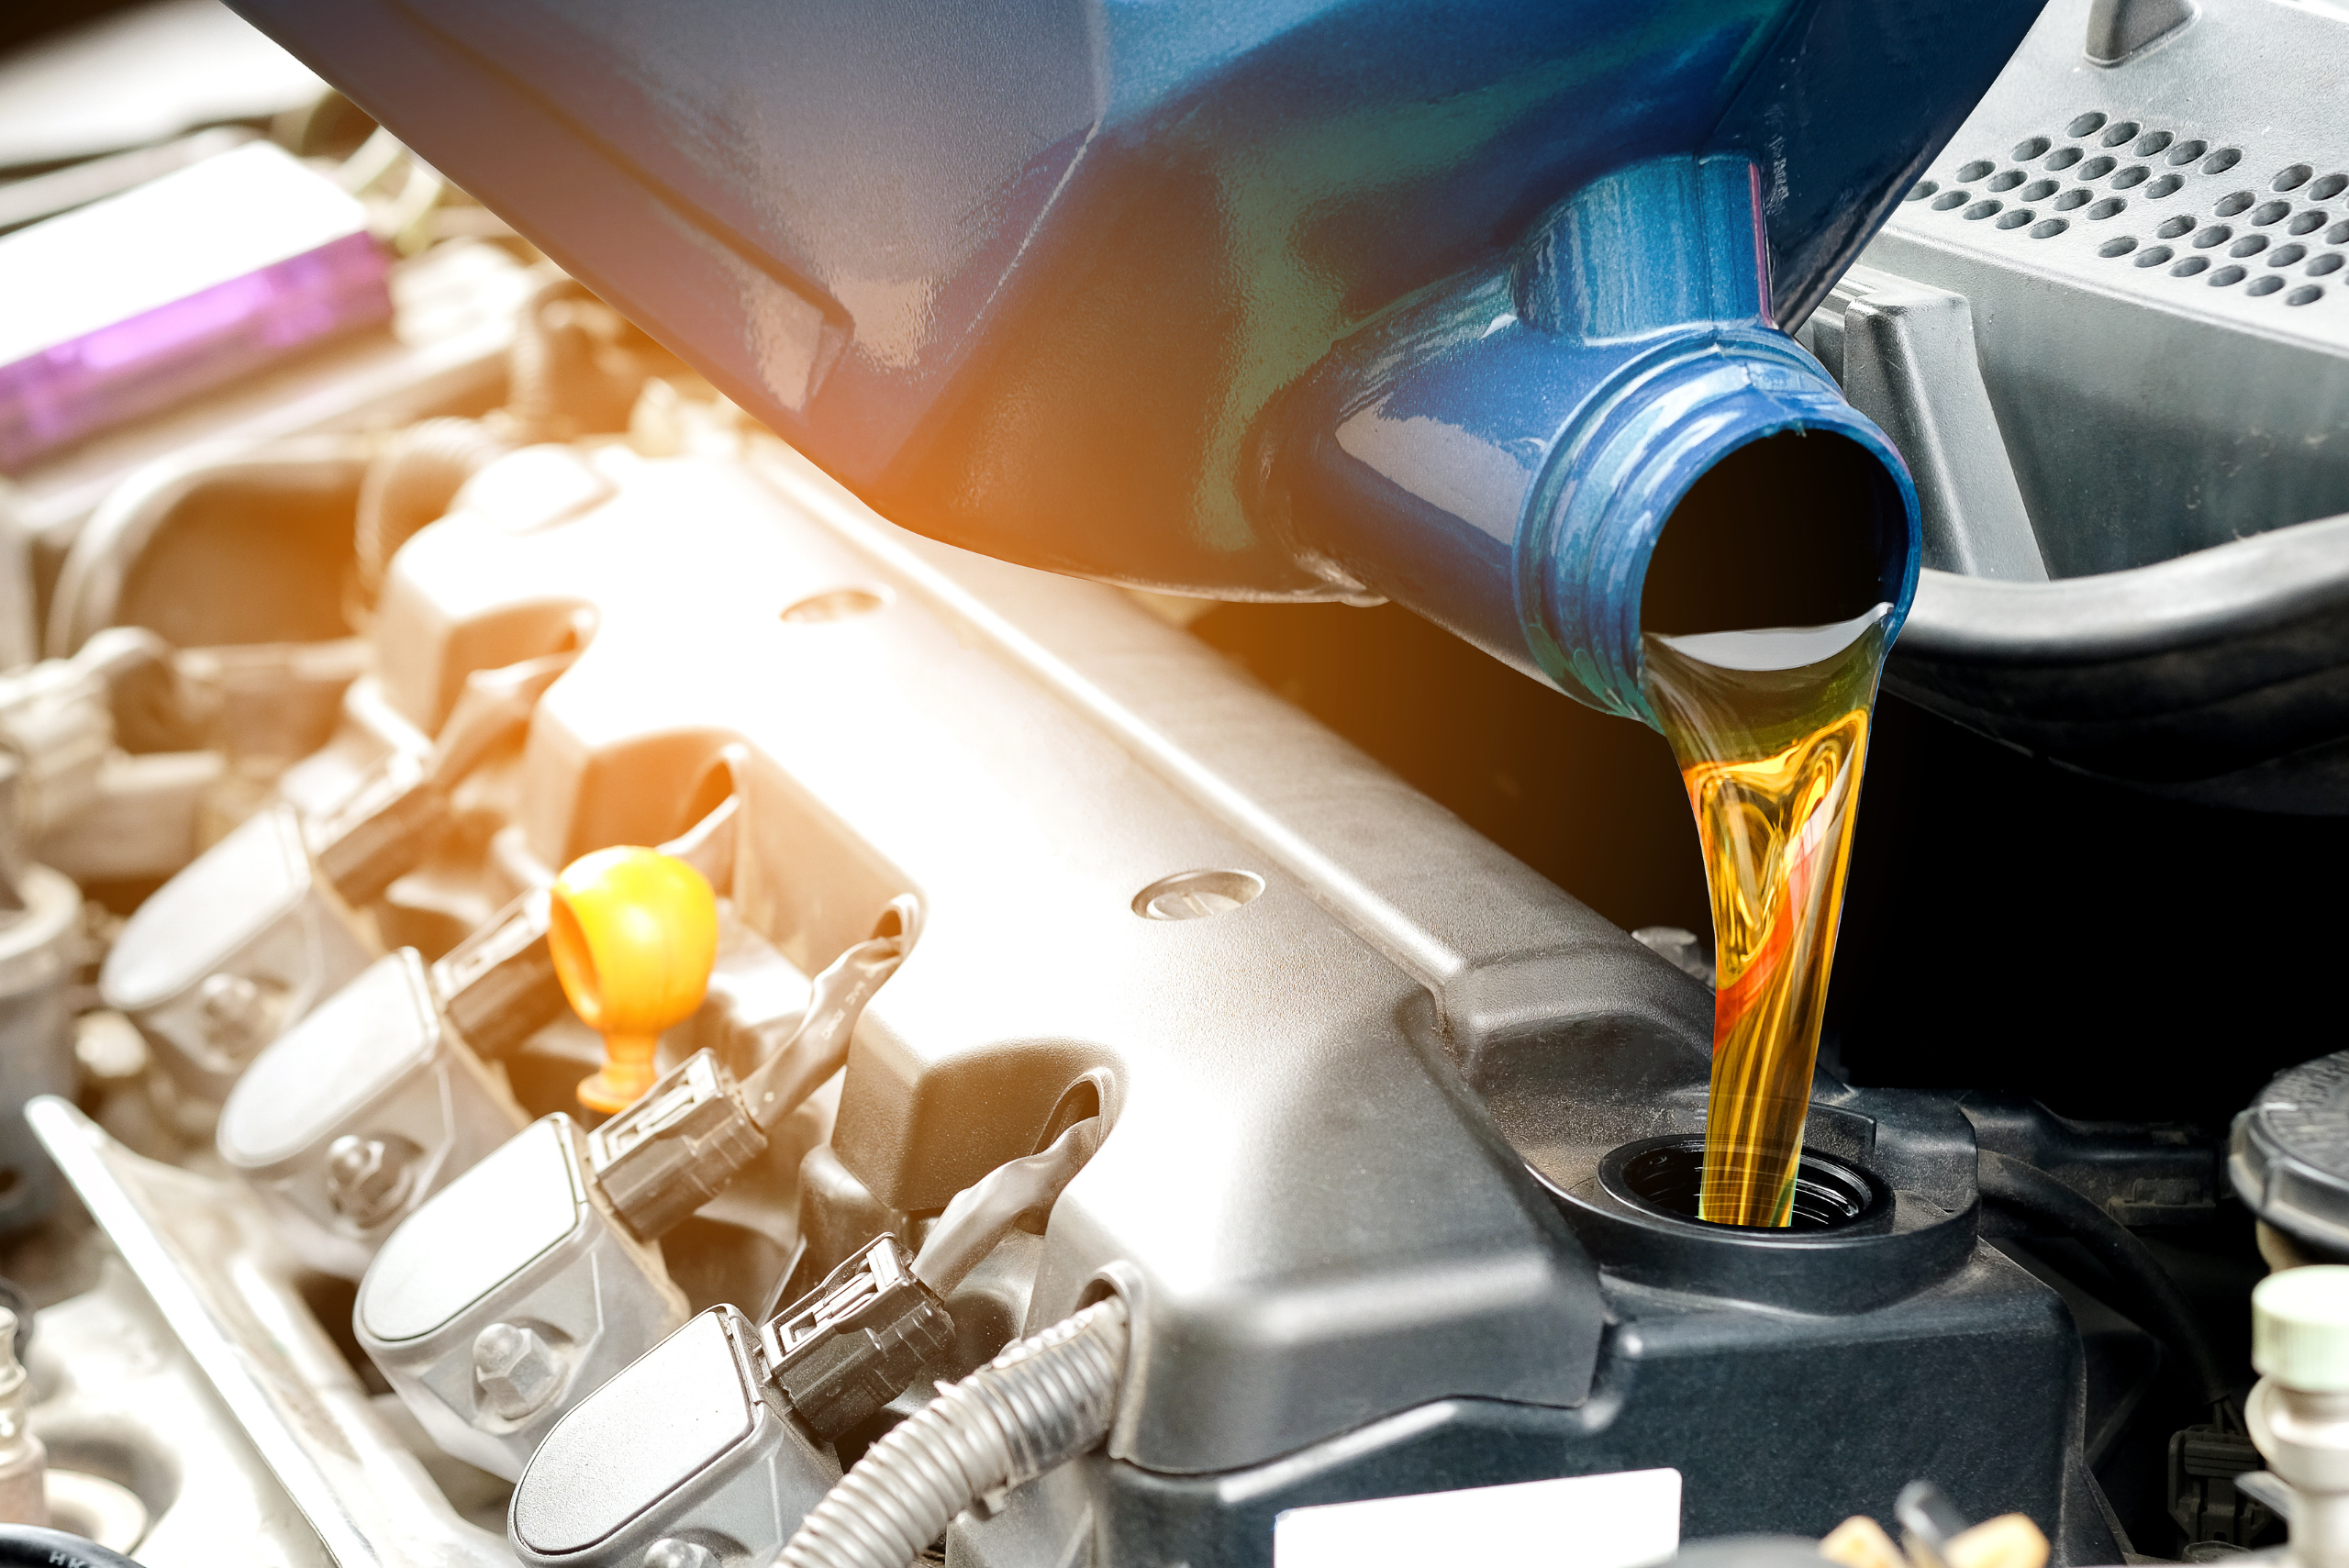 DIY Car Maintenance: How to Change Your Engine Oil